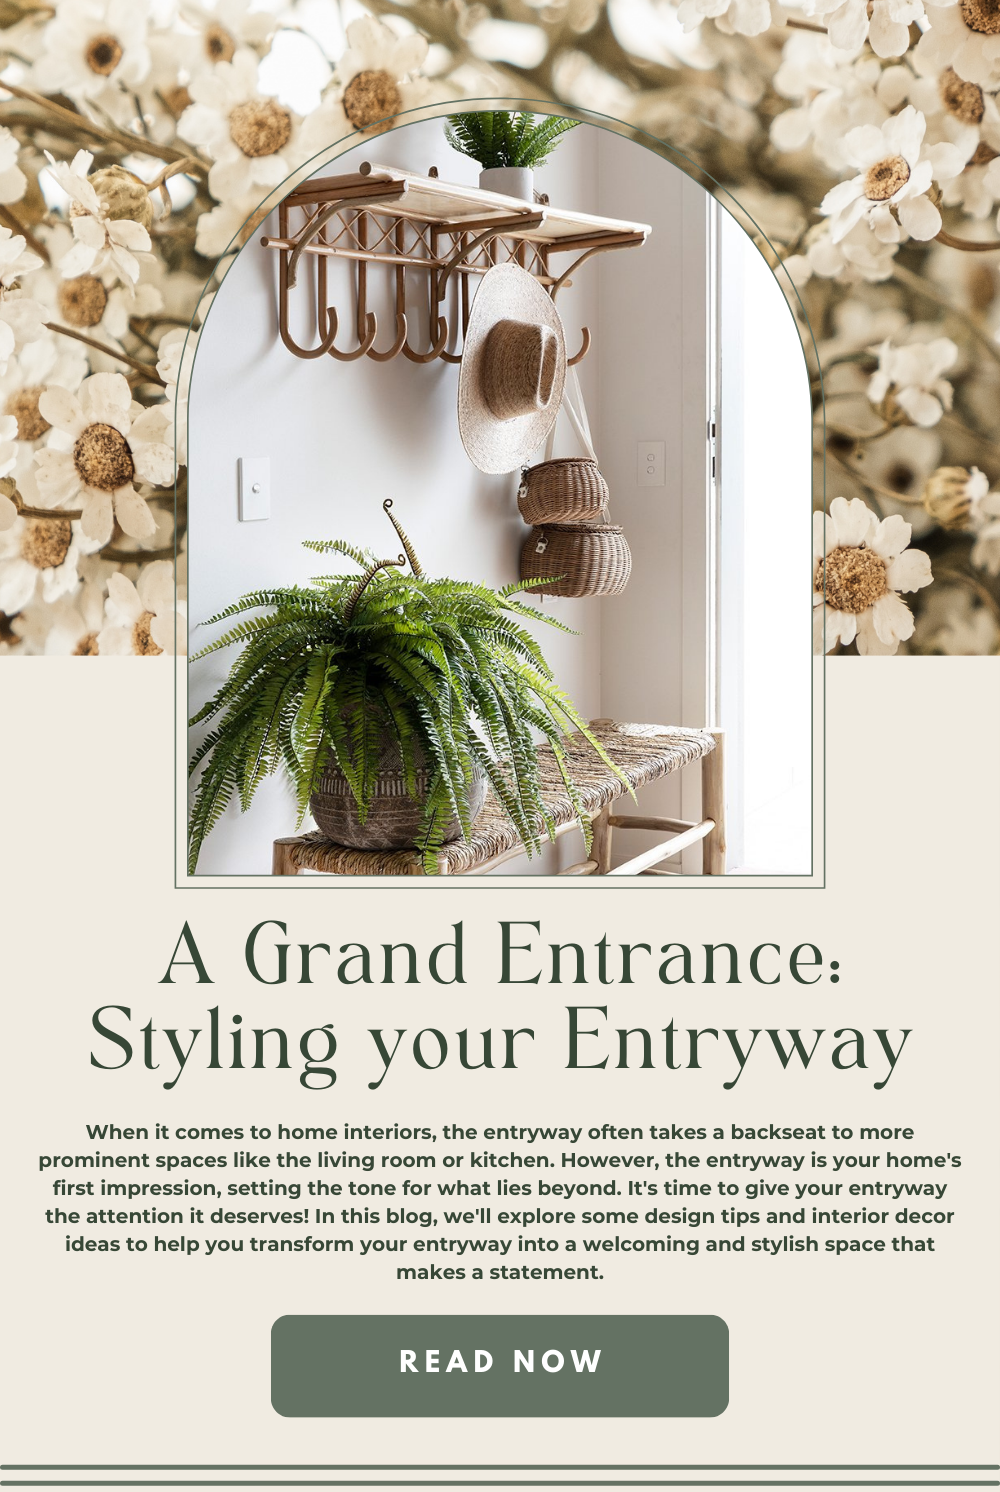 A Grand Entrance: Styling your Entryway